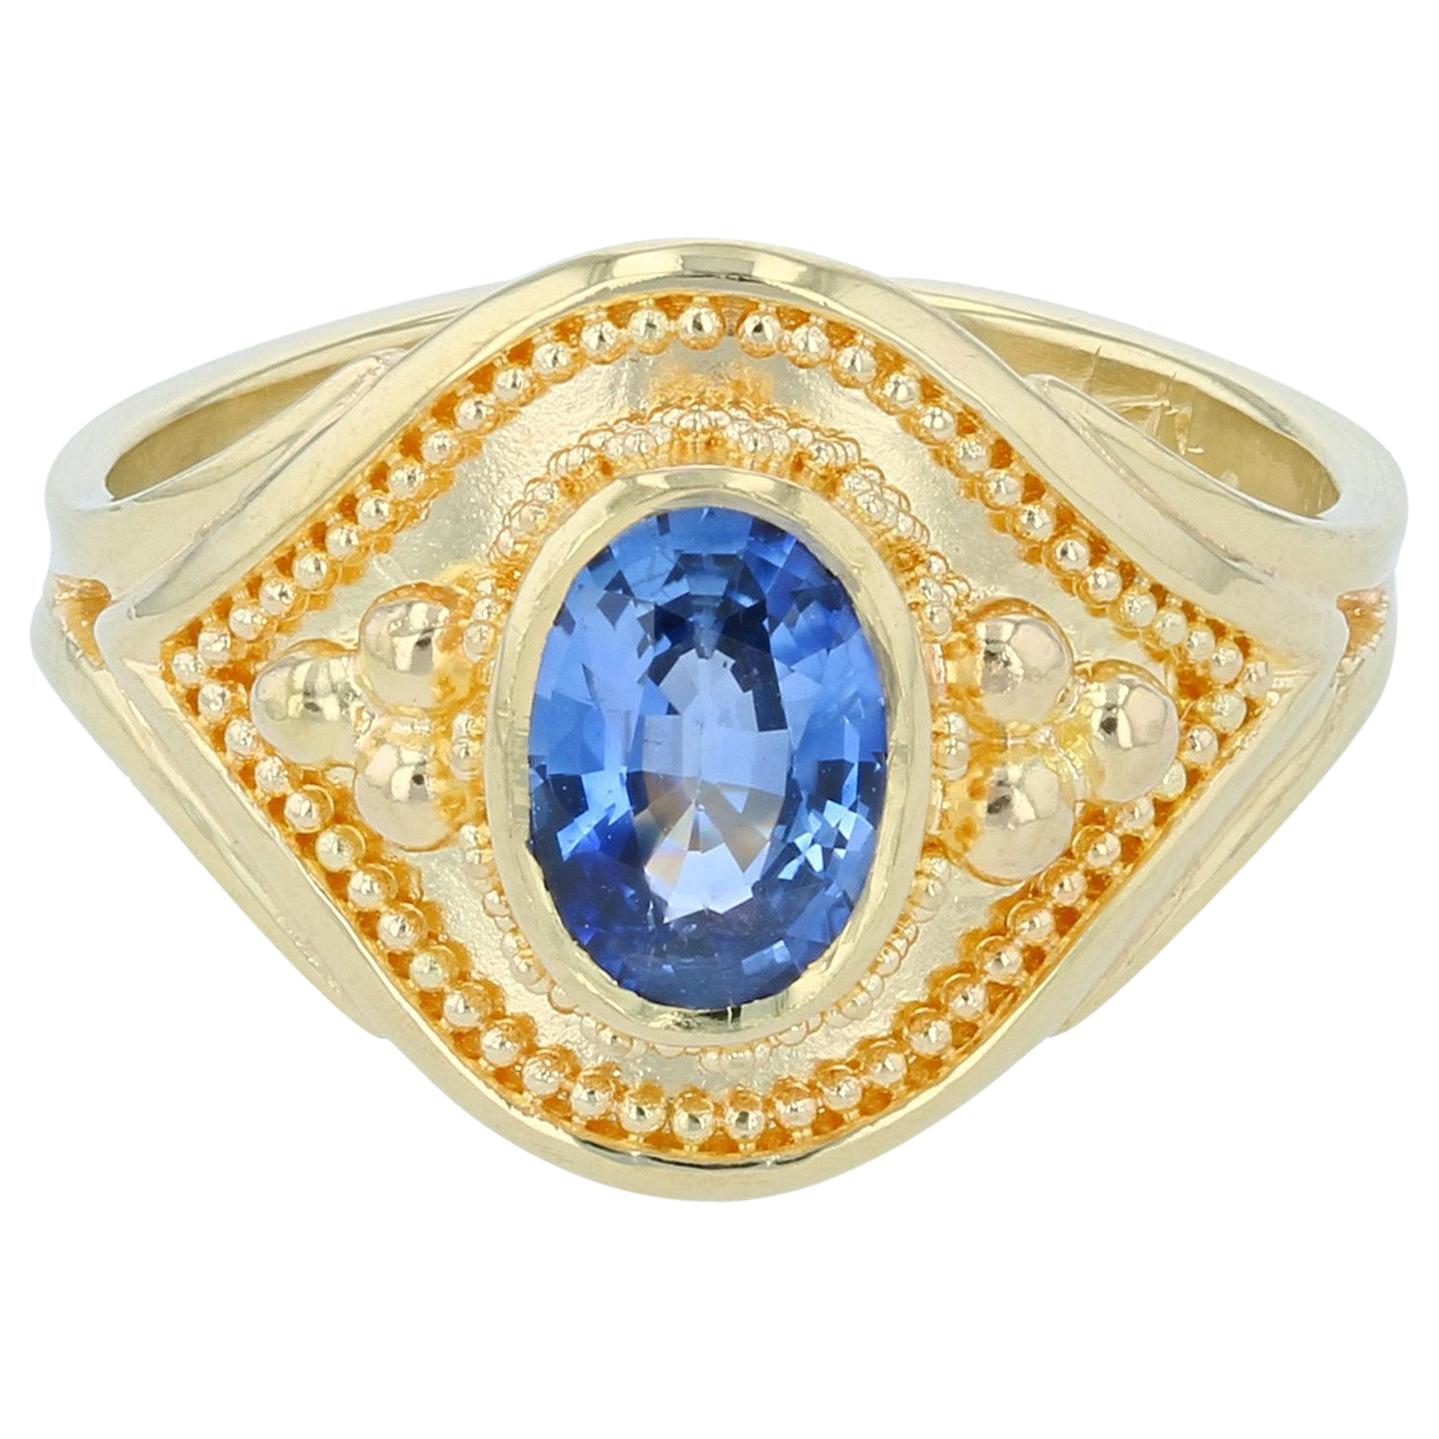 Kent Raible Blue Sapphire Solitaire Ring with 18 Karat Gold Granulation